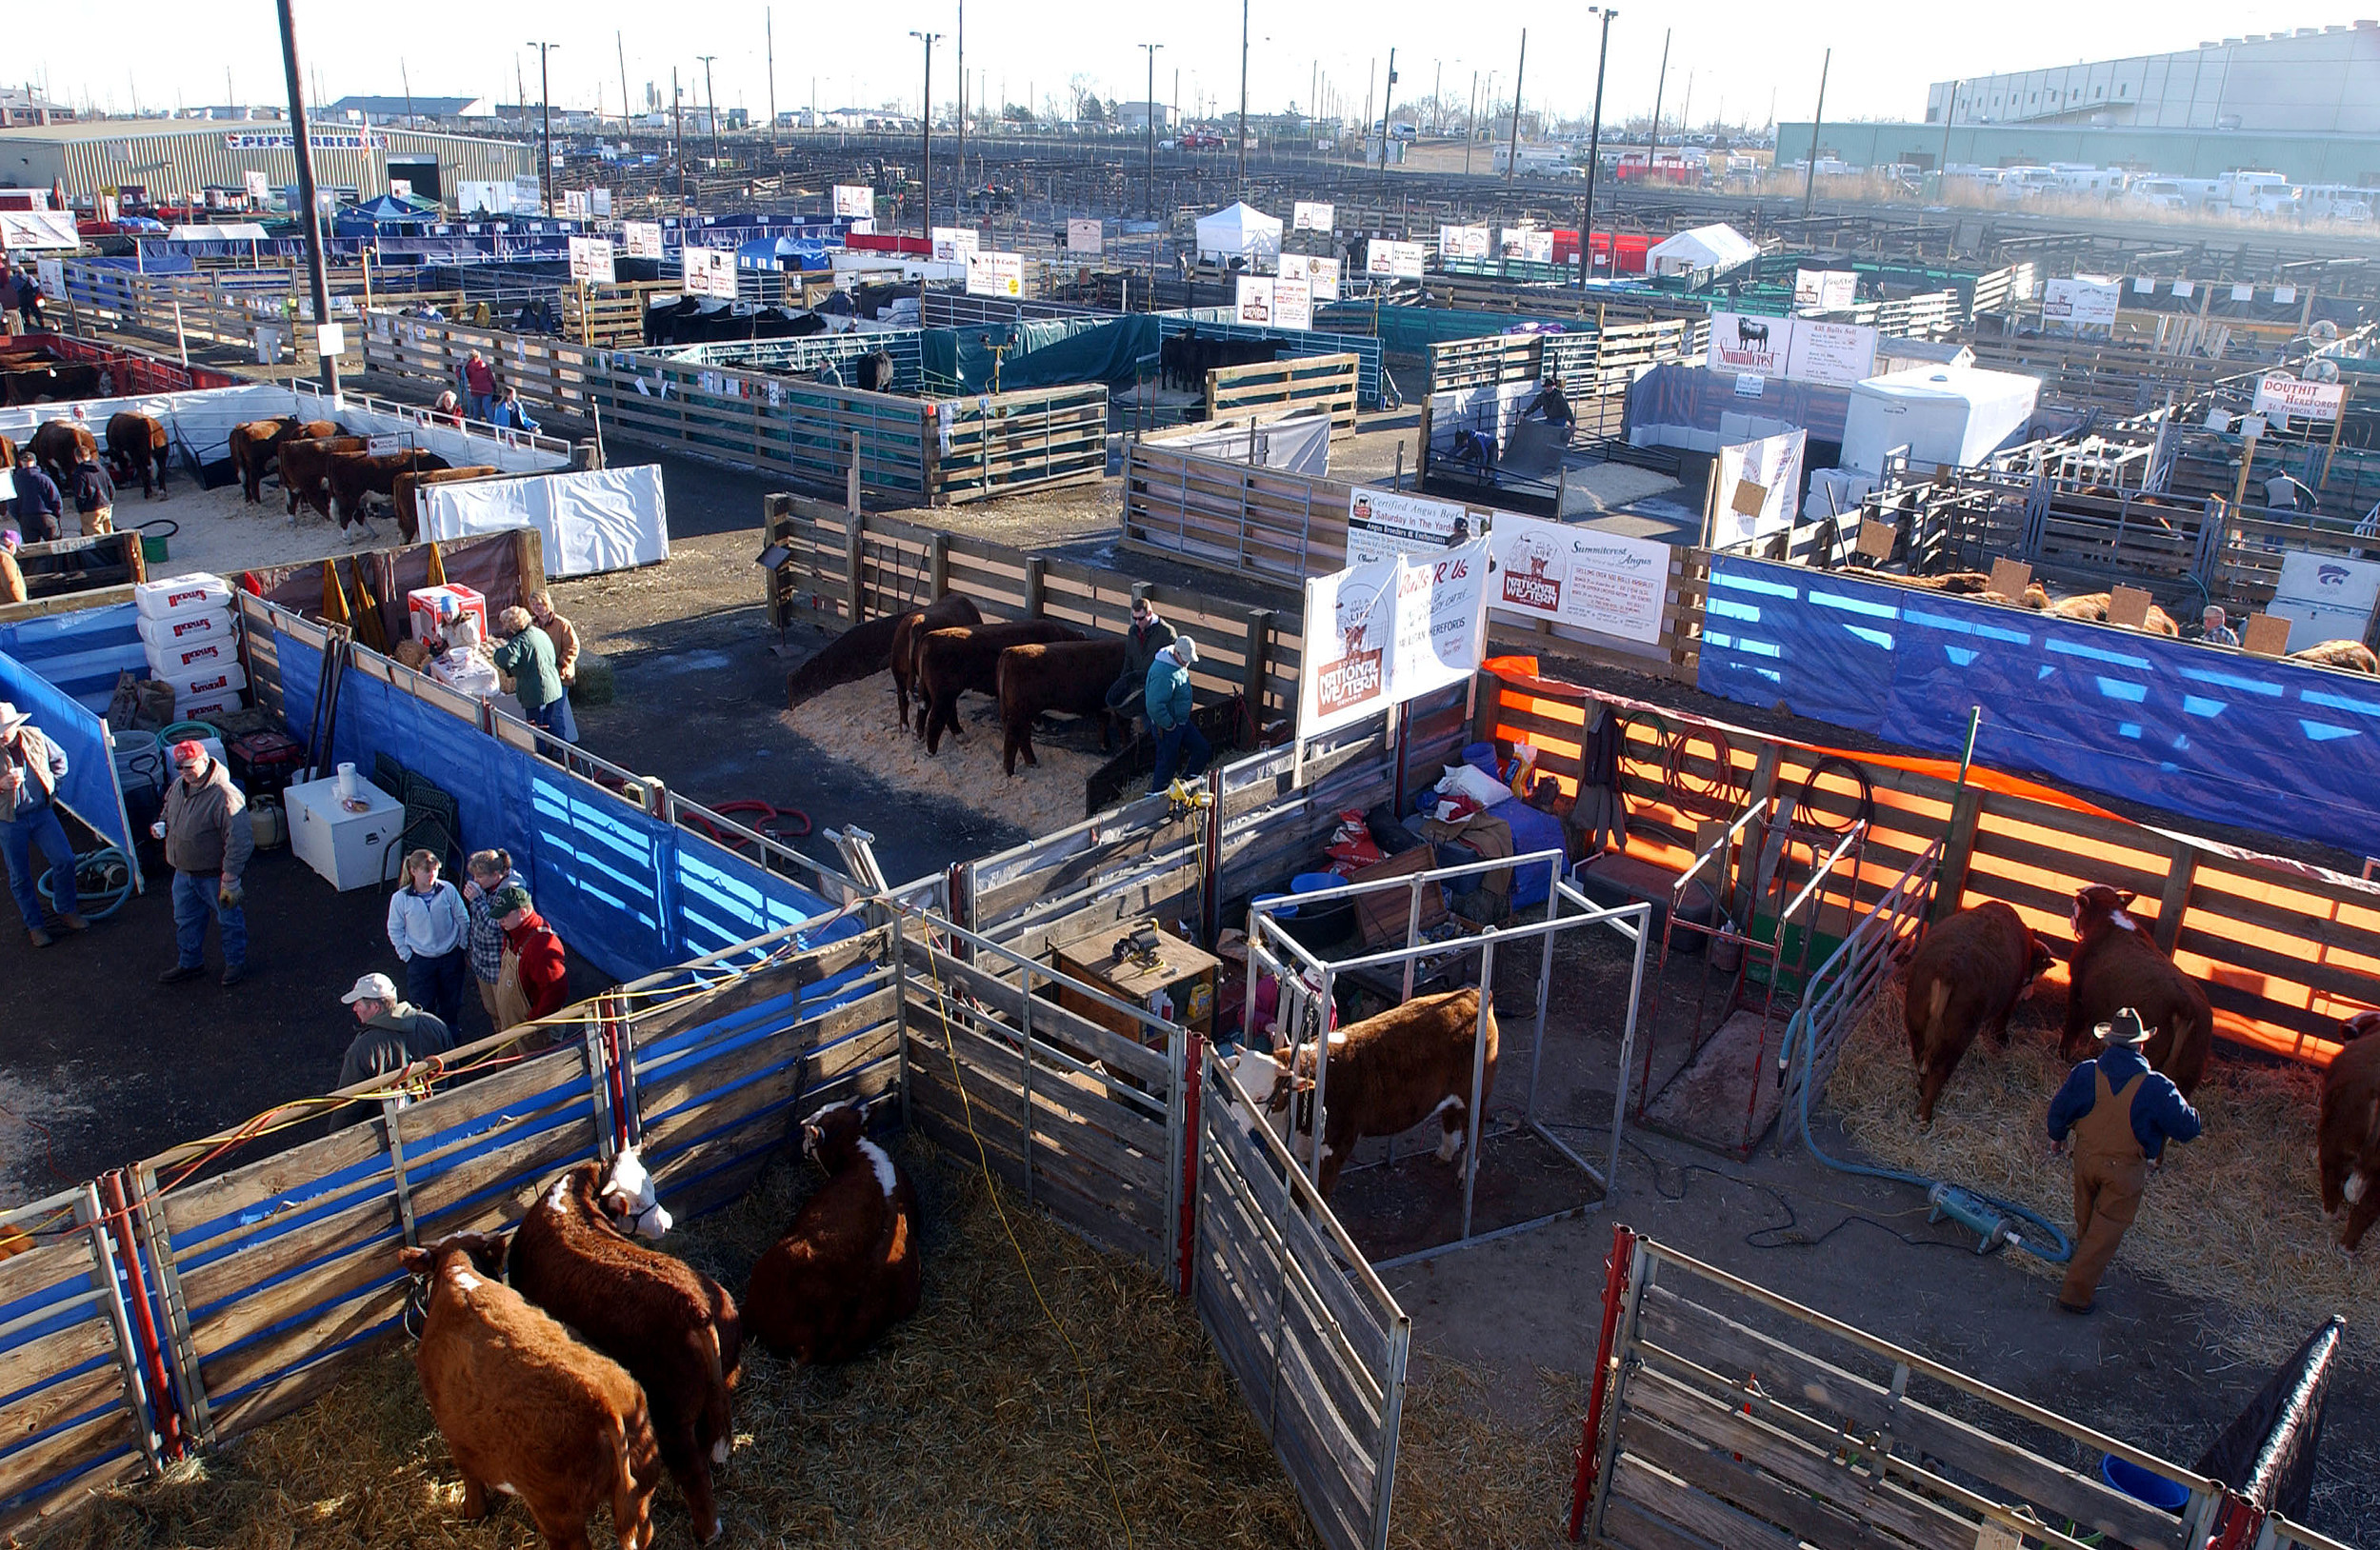 National Western Stock Show 2018 Schedule of Events